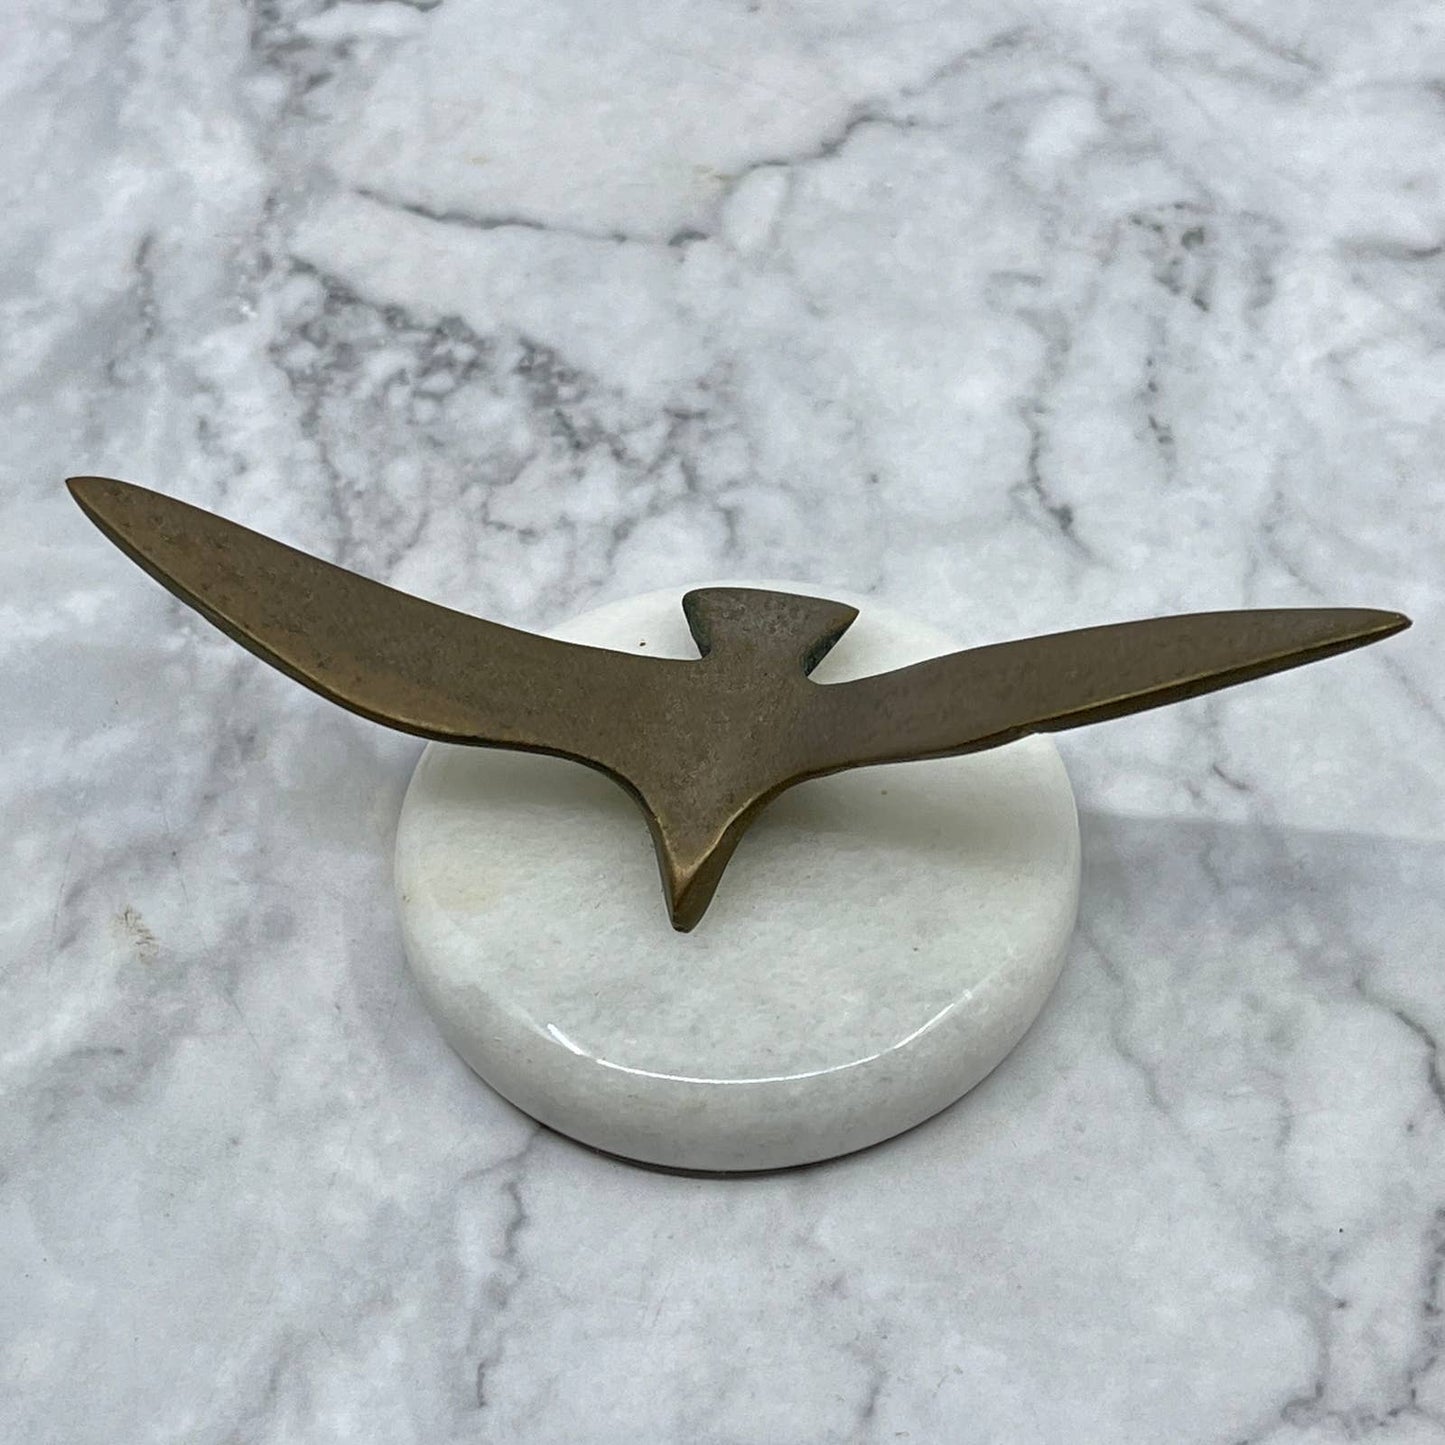 VTG Art Deco MCM Copper Eagle Paperweight on Marble Stone Base 4.5x2" TJ1